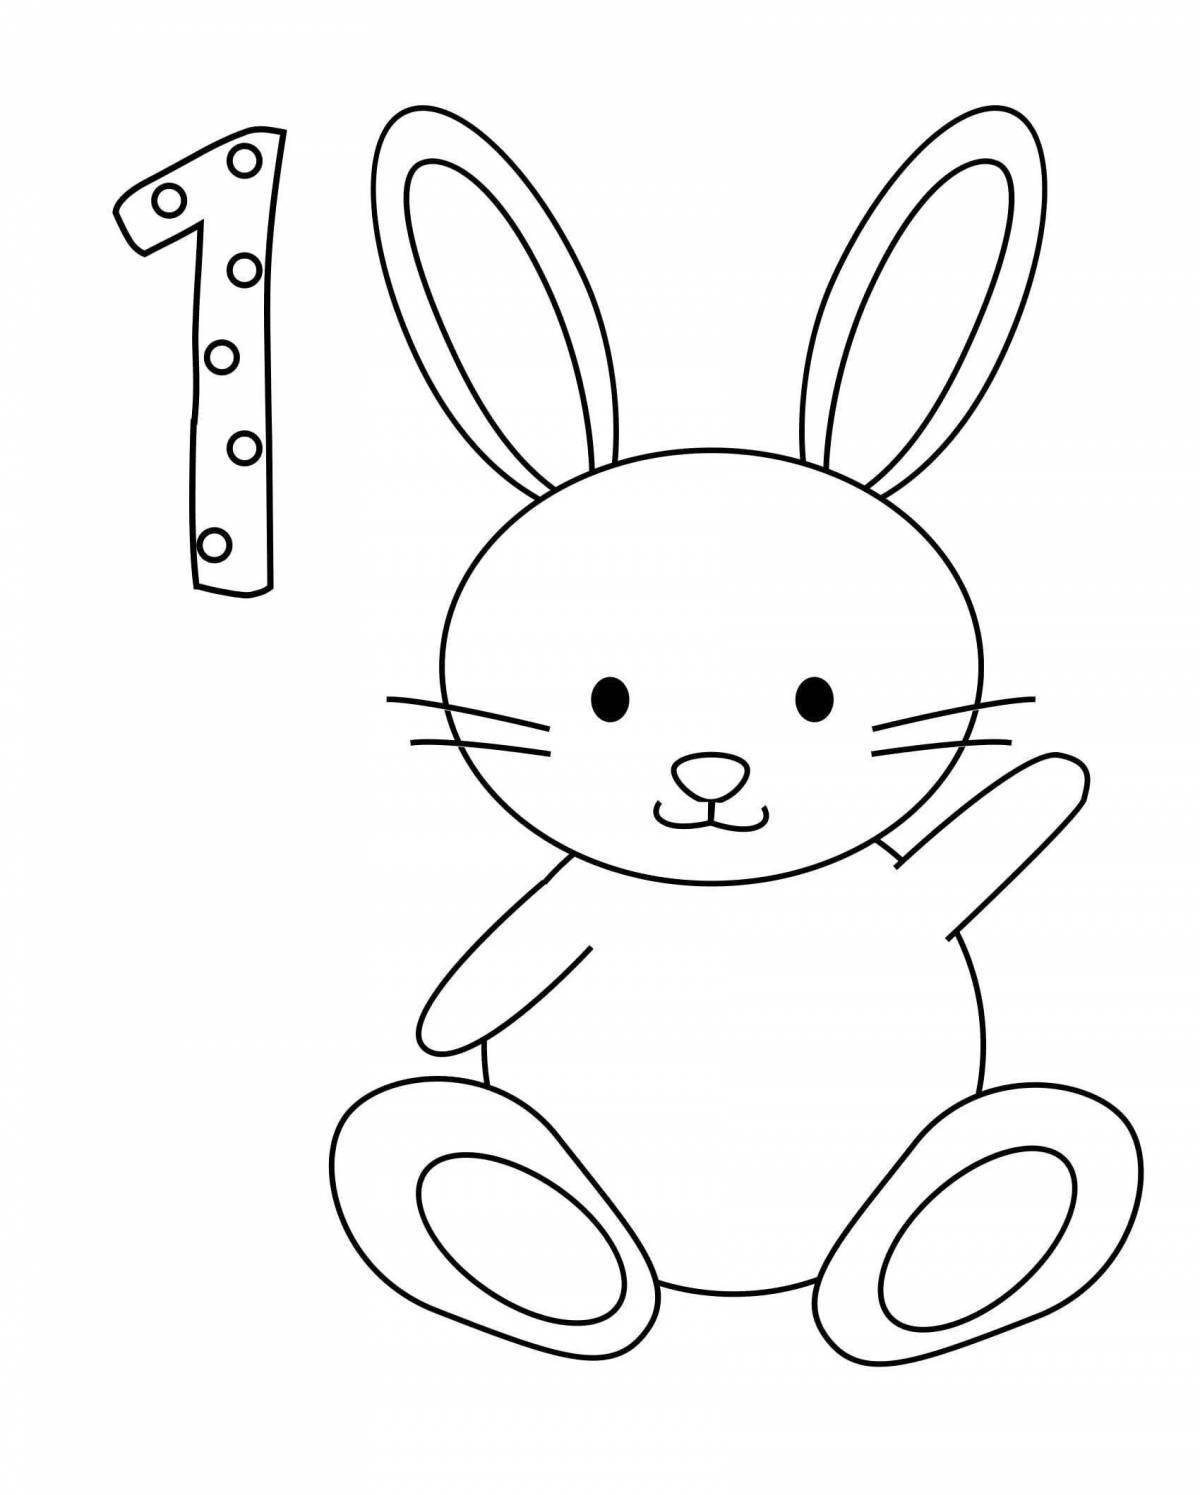 Sly rabbit coloring book